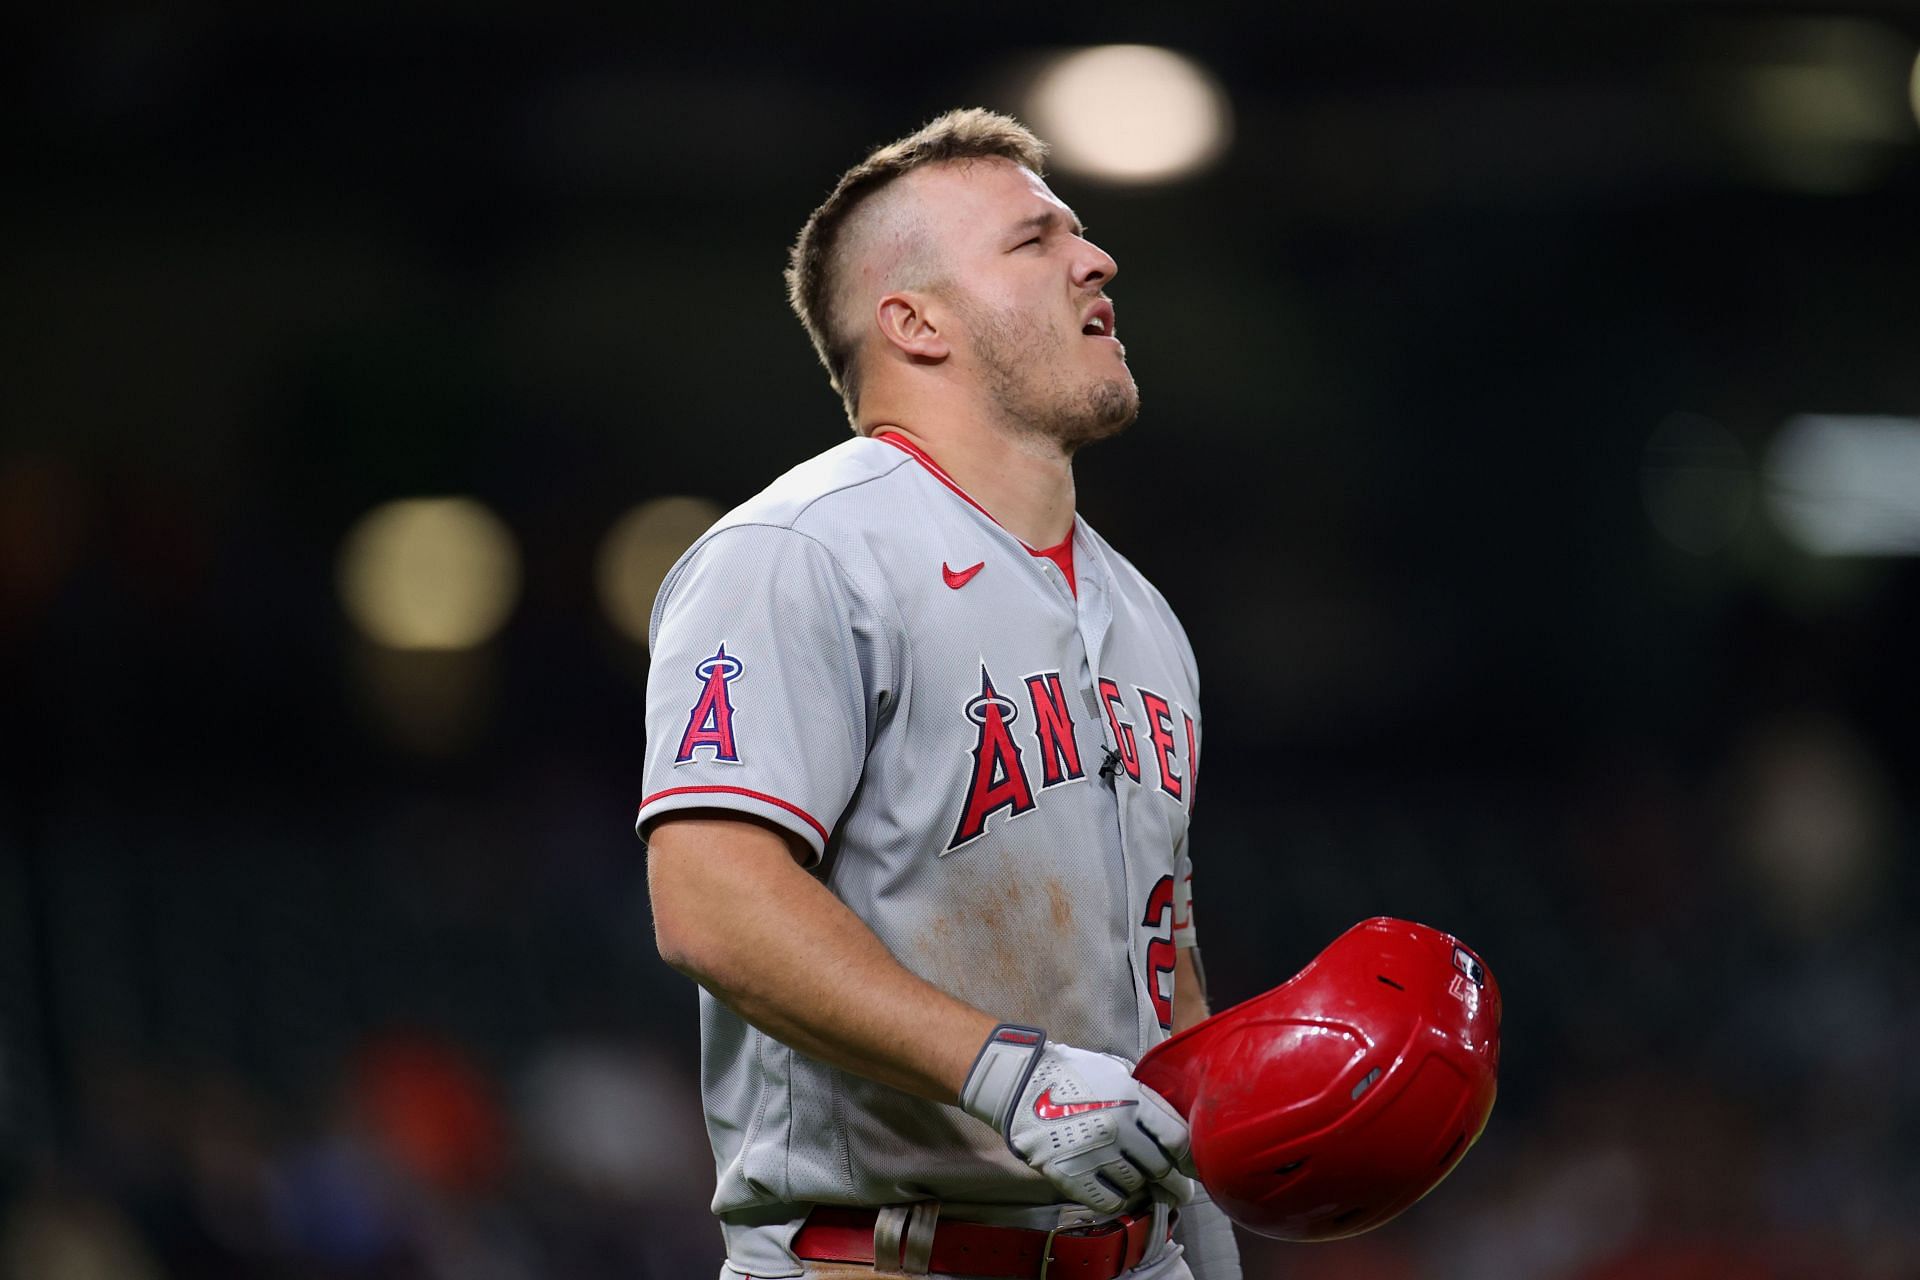 Los Angeles Angels outfielder Mike Trout missed a diving catch to give the New York Yankees a 1-0 lead.